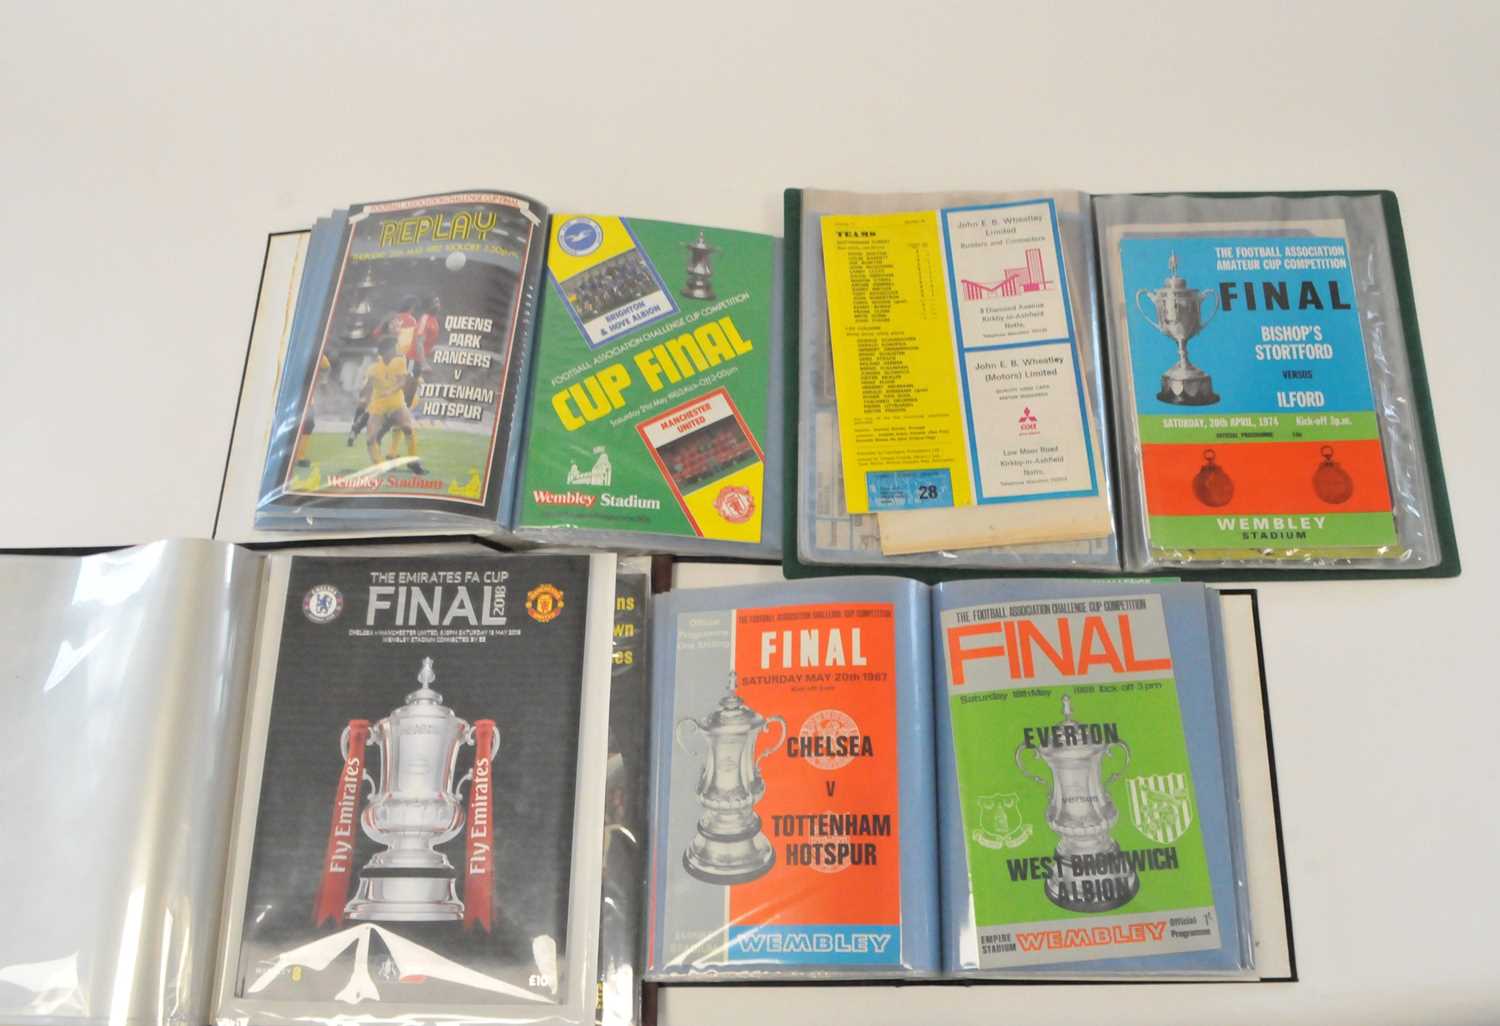 FA CUP FINAL programmes 1950-1986. Includes replays in 1970, 1981, 1982, 1983, and 2 copies of 1953,